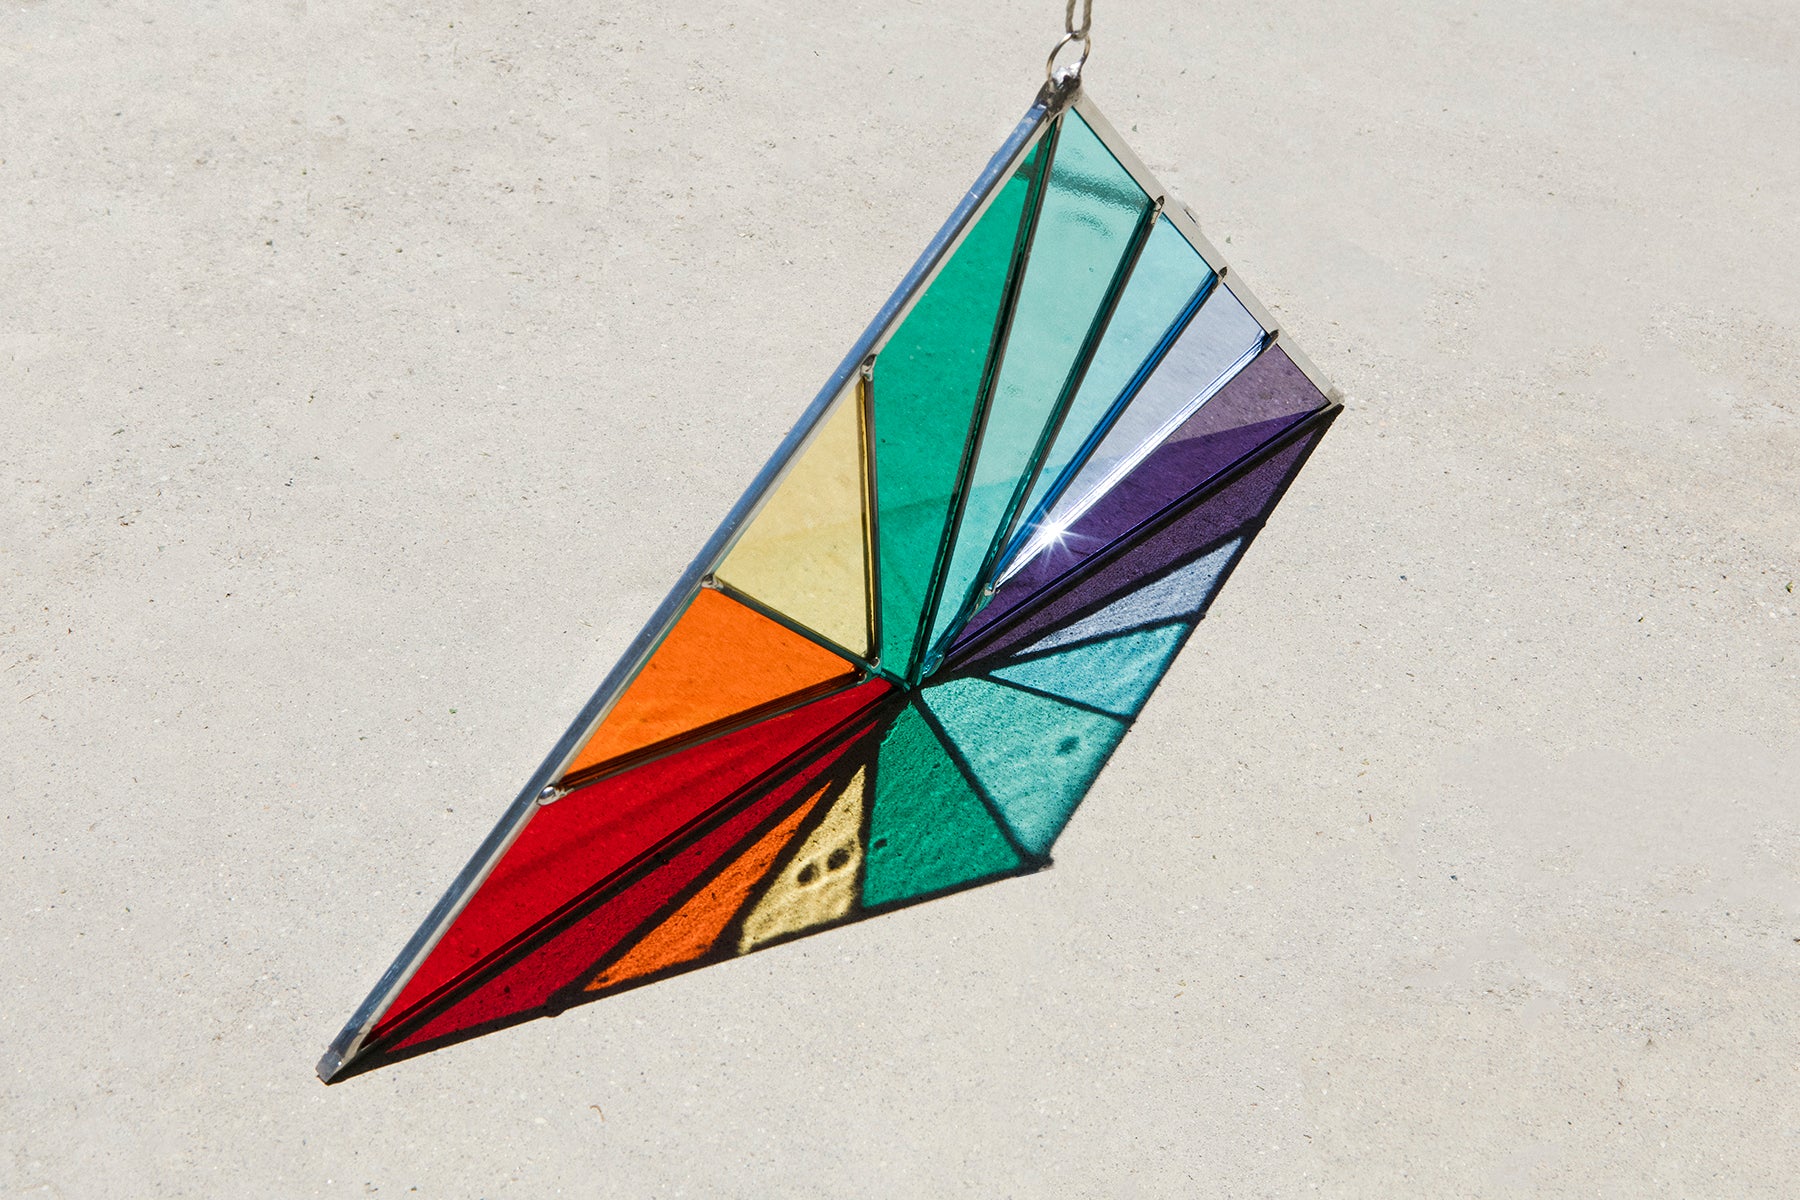 Photograph of a larger, multi coloured, geometric stained glass piece made by Debbie Bean, hanging outside with the sunlight shining through it. 